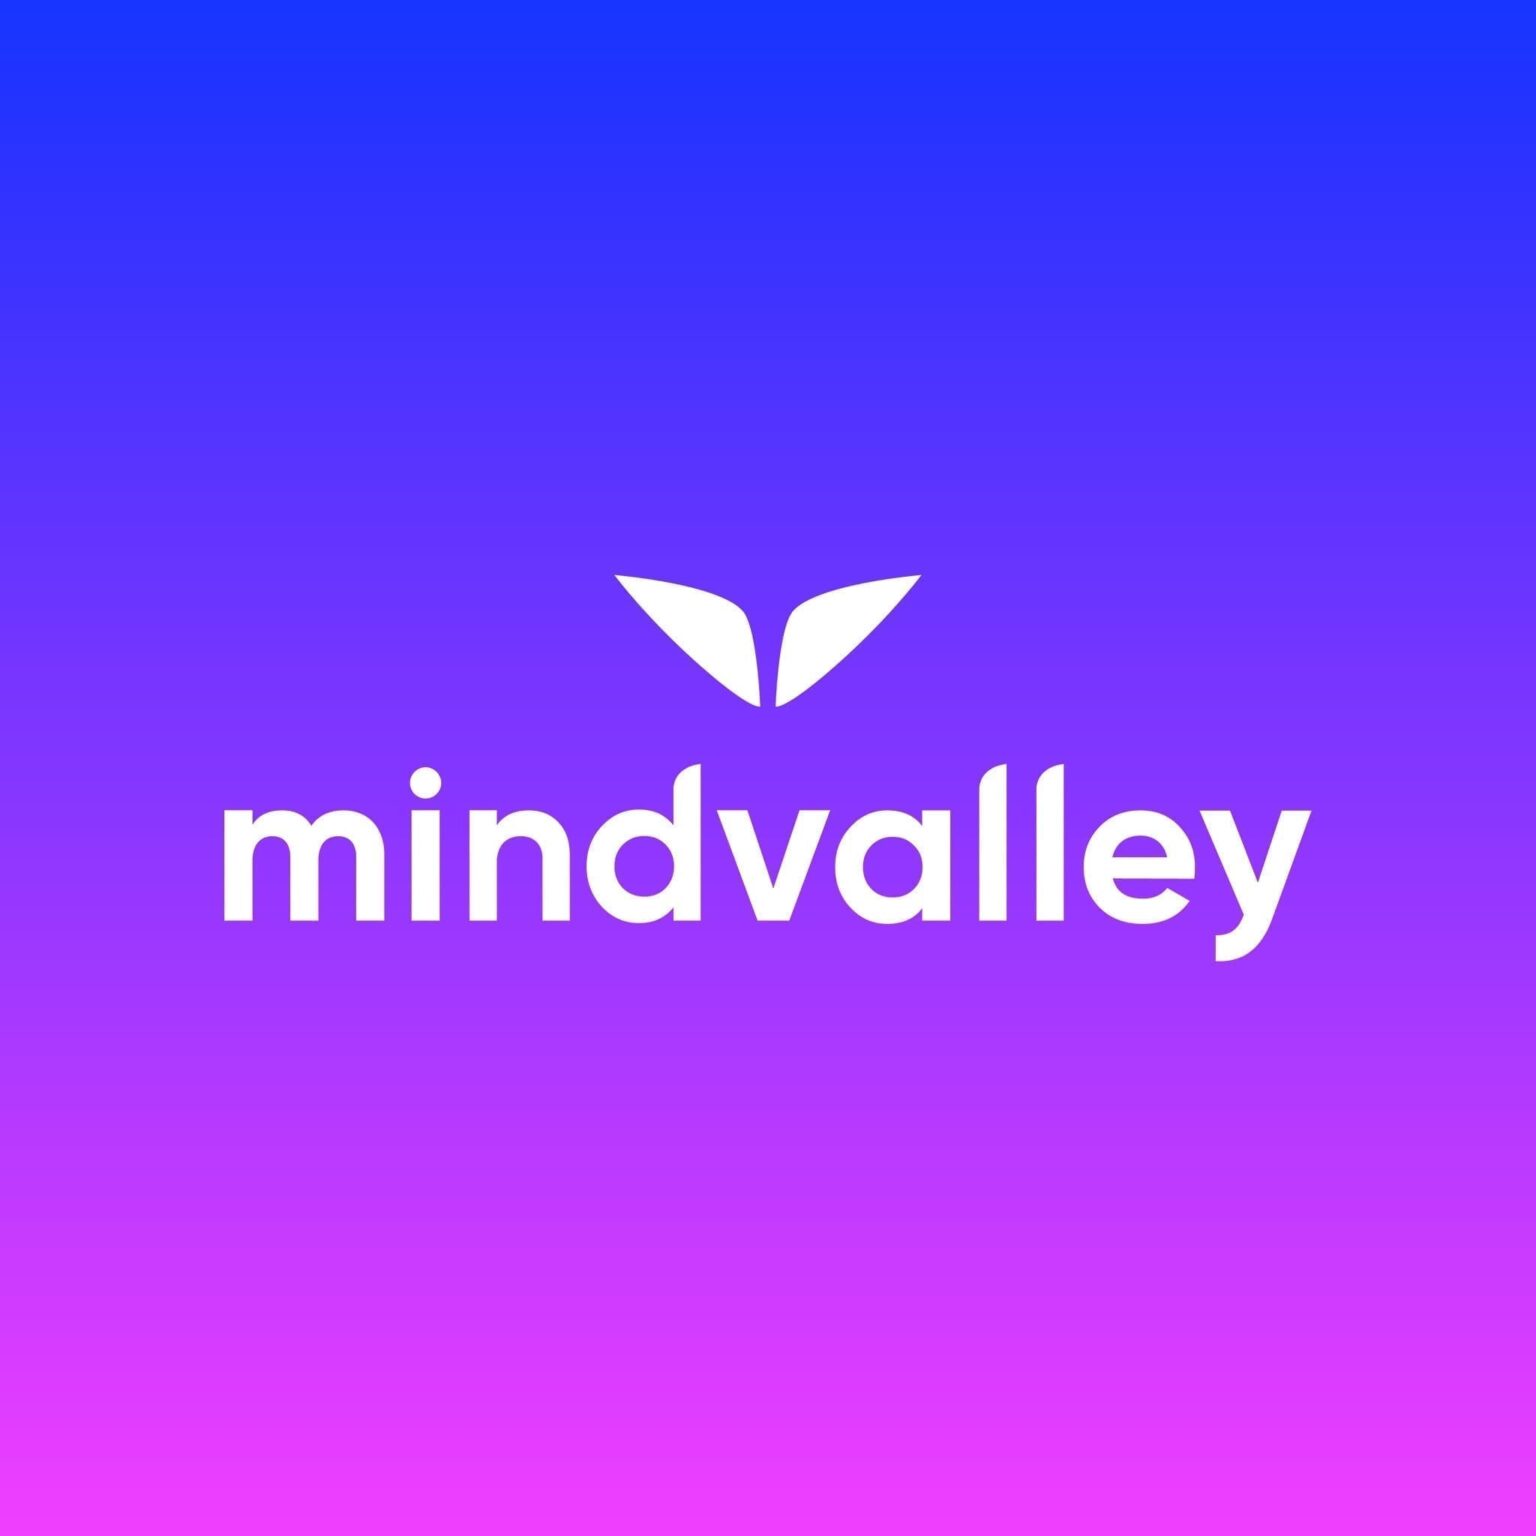 Mindvalley has become a driving force in the personal development industry. Here's how Mindvalley can help you.